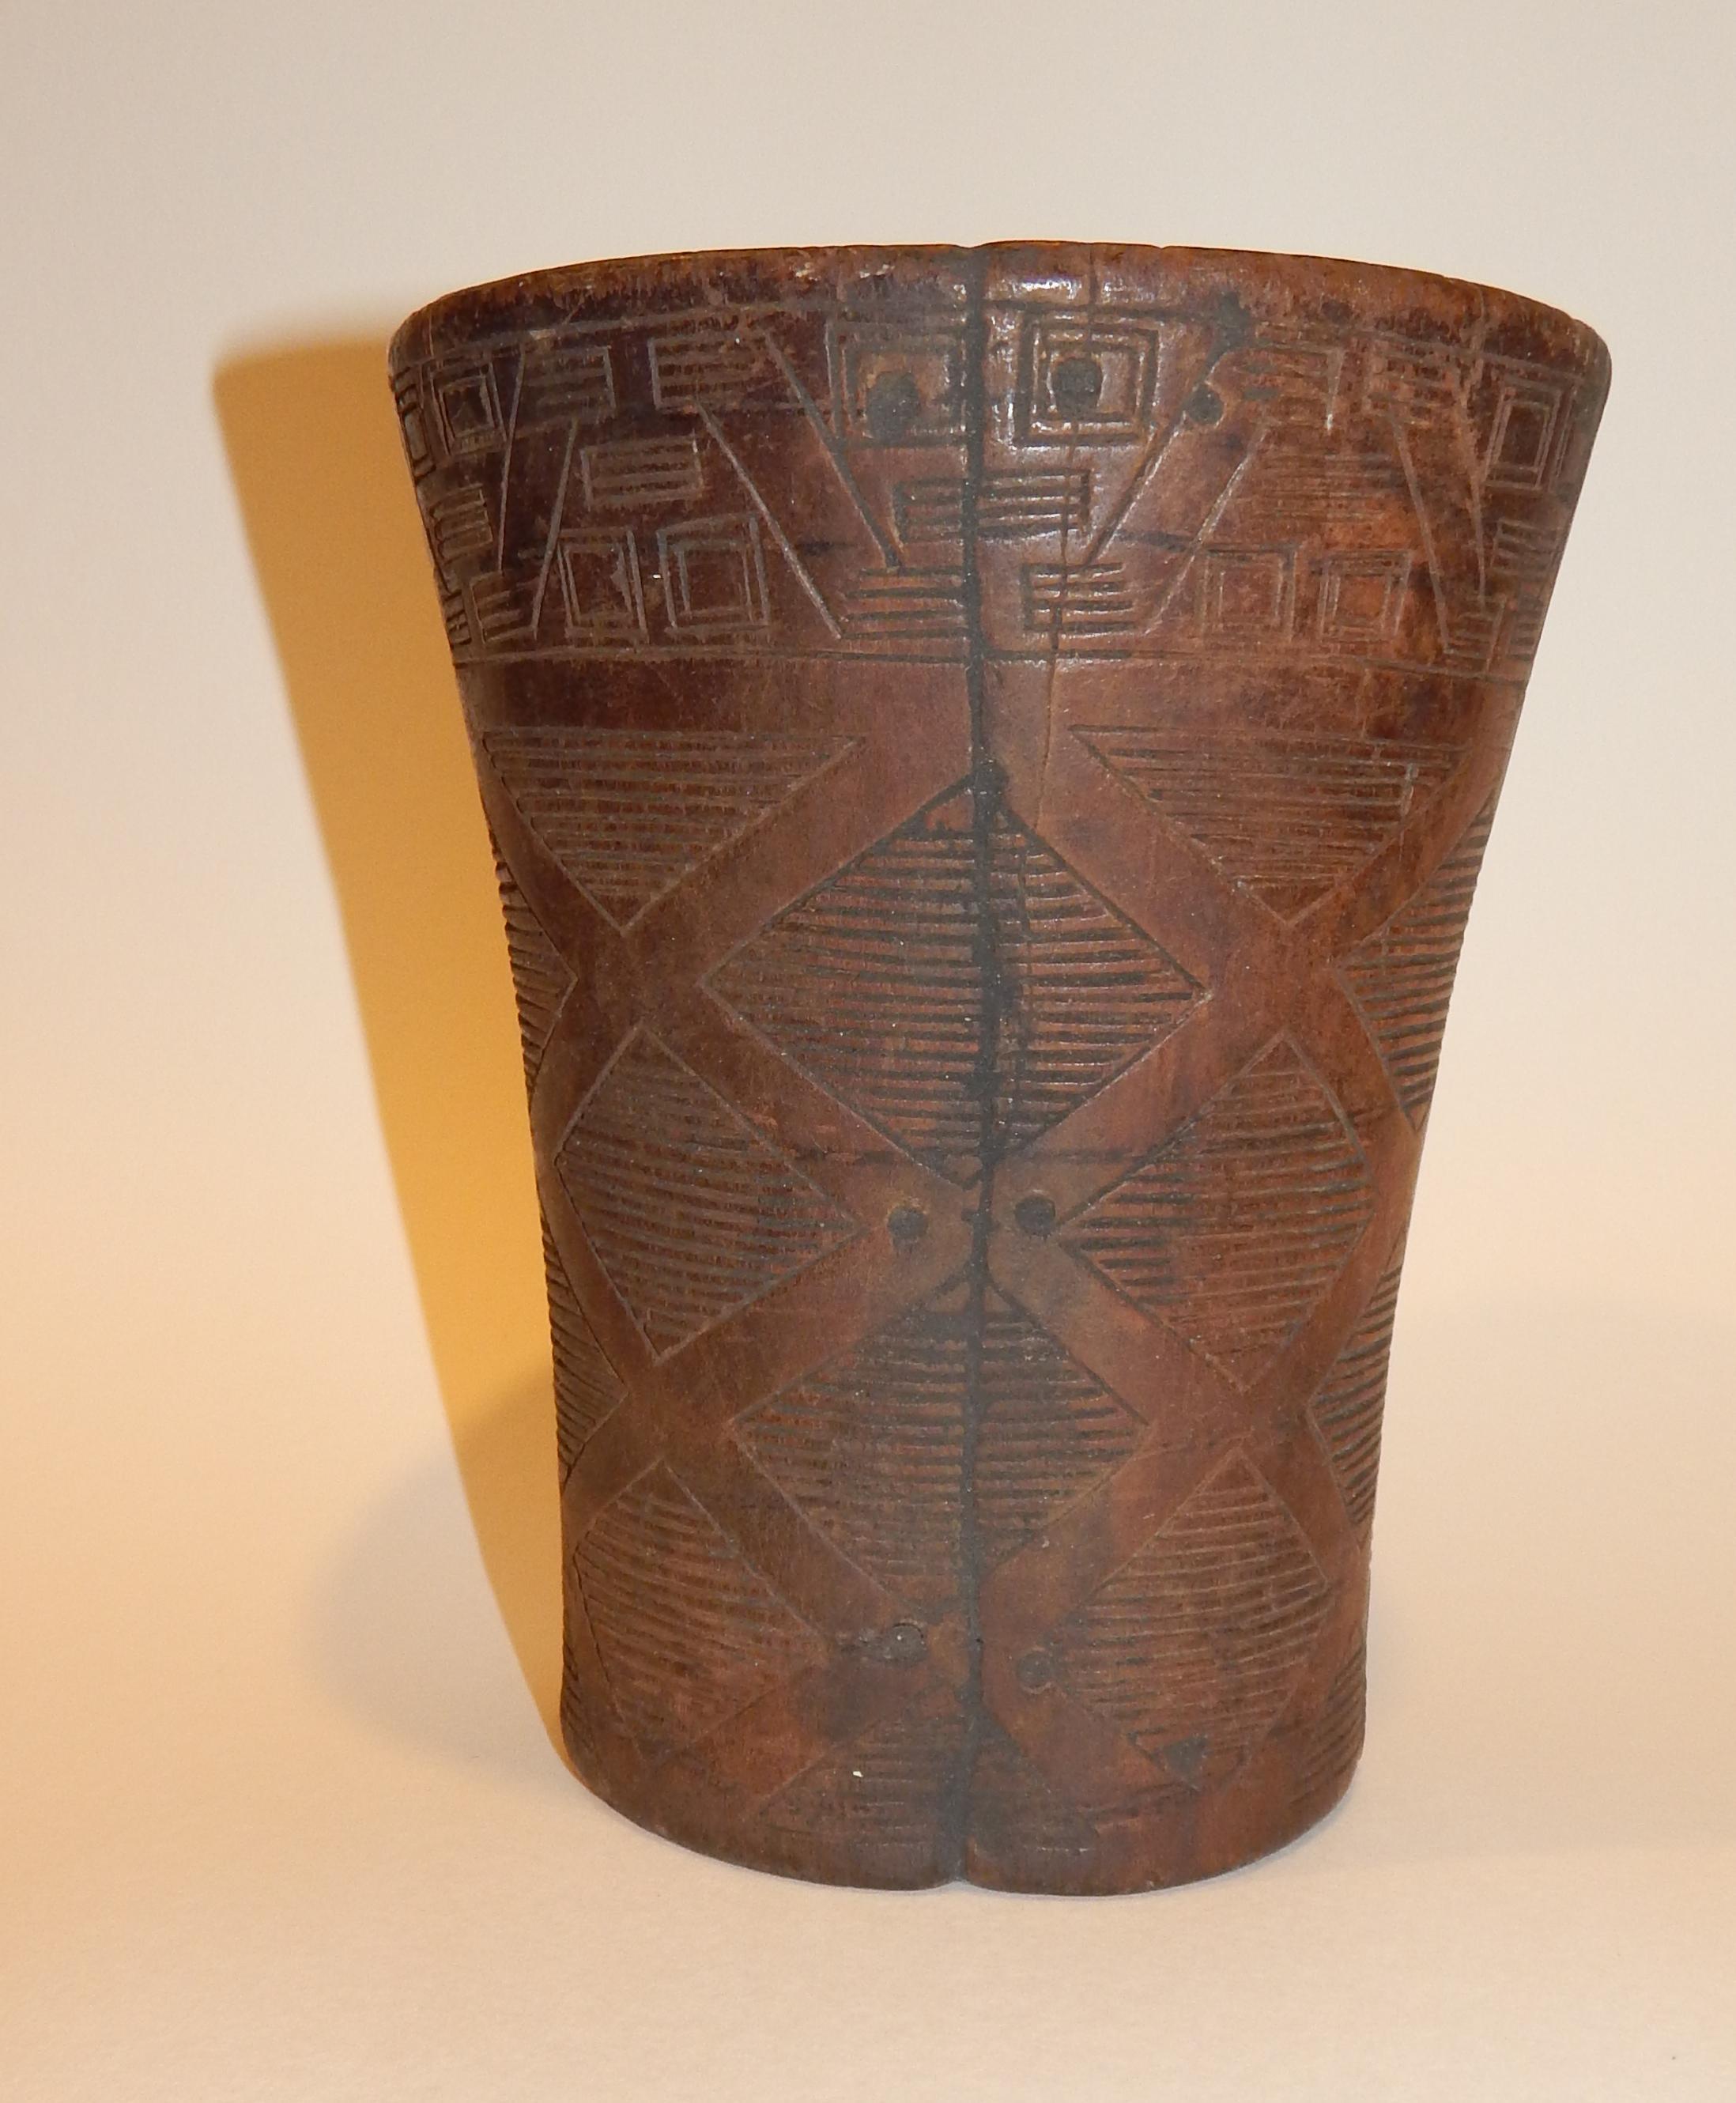 Large wooden Pre-Columbian Inca Kero cup.
From Central Peru, circa 1300 to 1500 AD. 
A hollowed wooden vessel, of conical form, decorated with carved incised lines in geometric pattern. 
Keros were traditionally made in pairs for the ritual